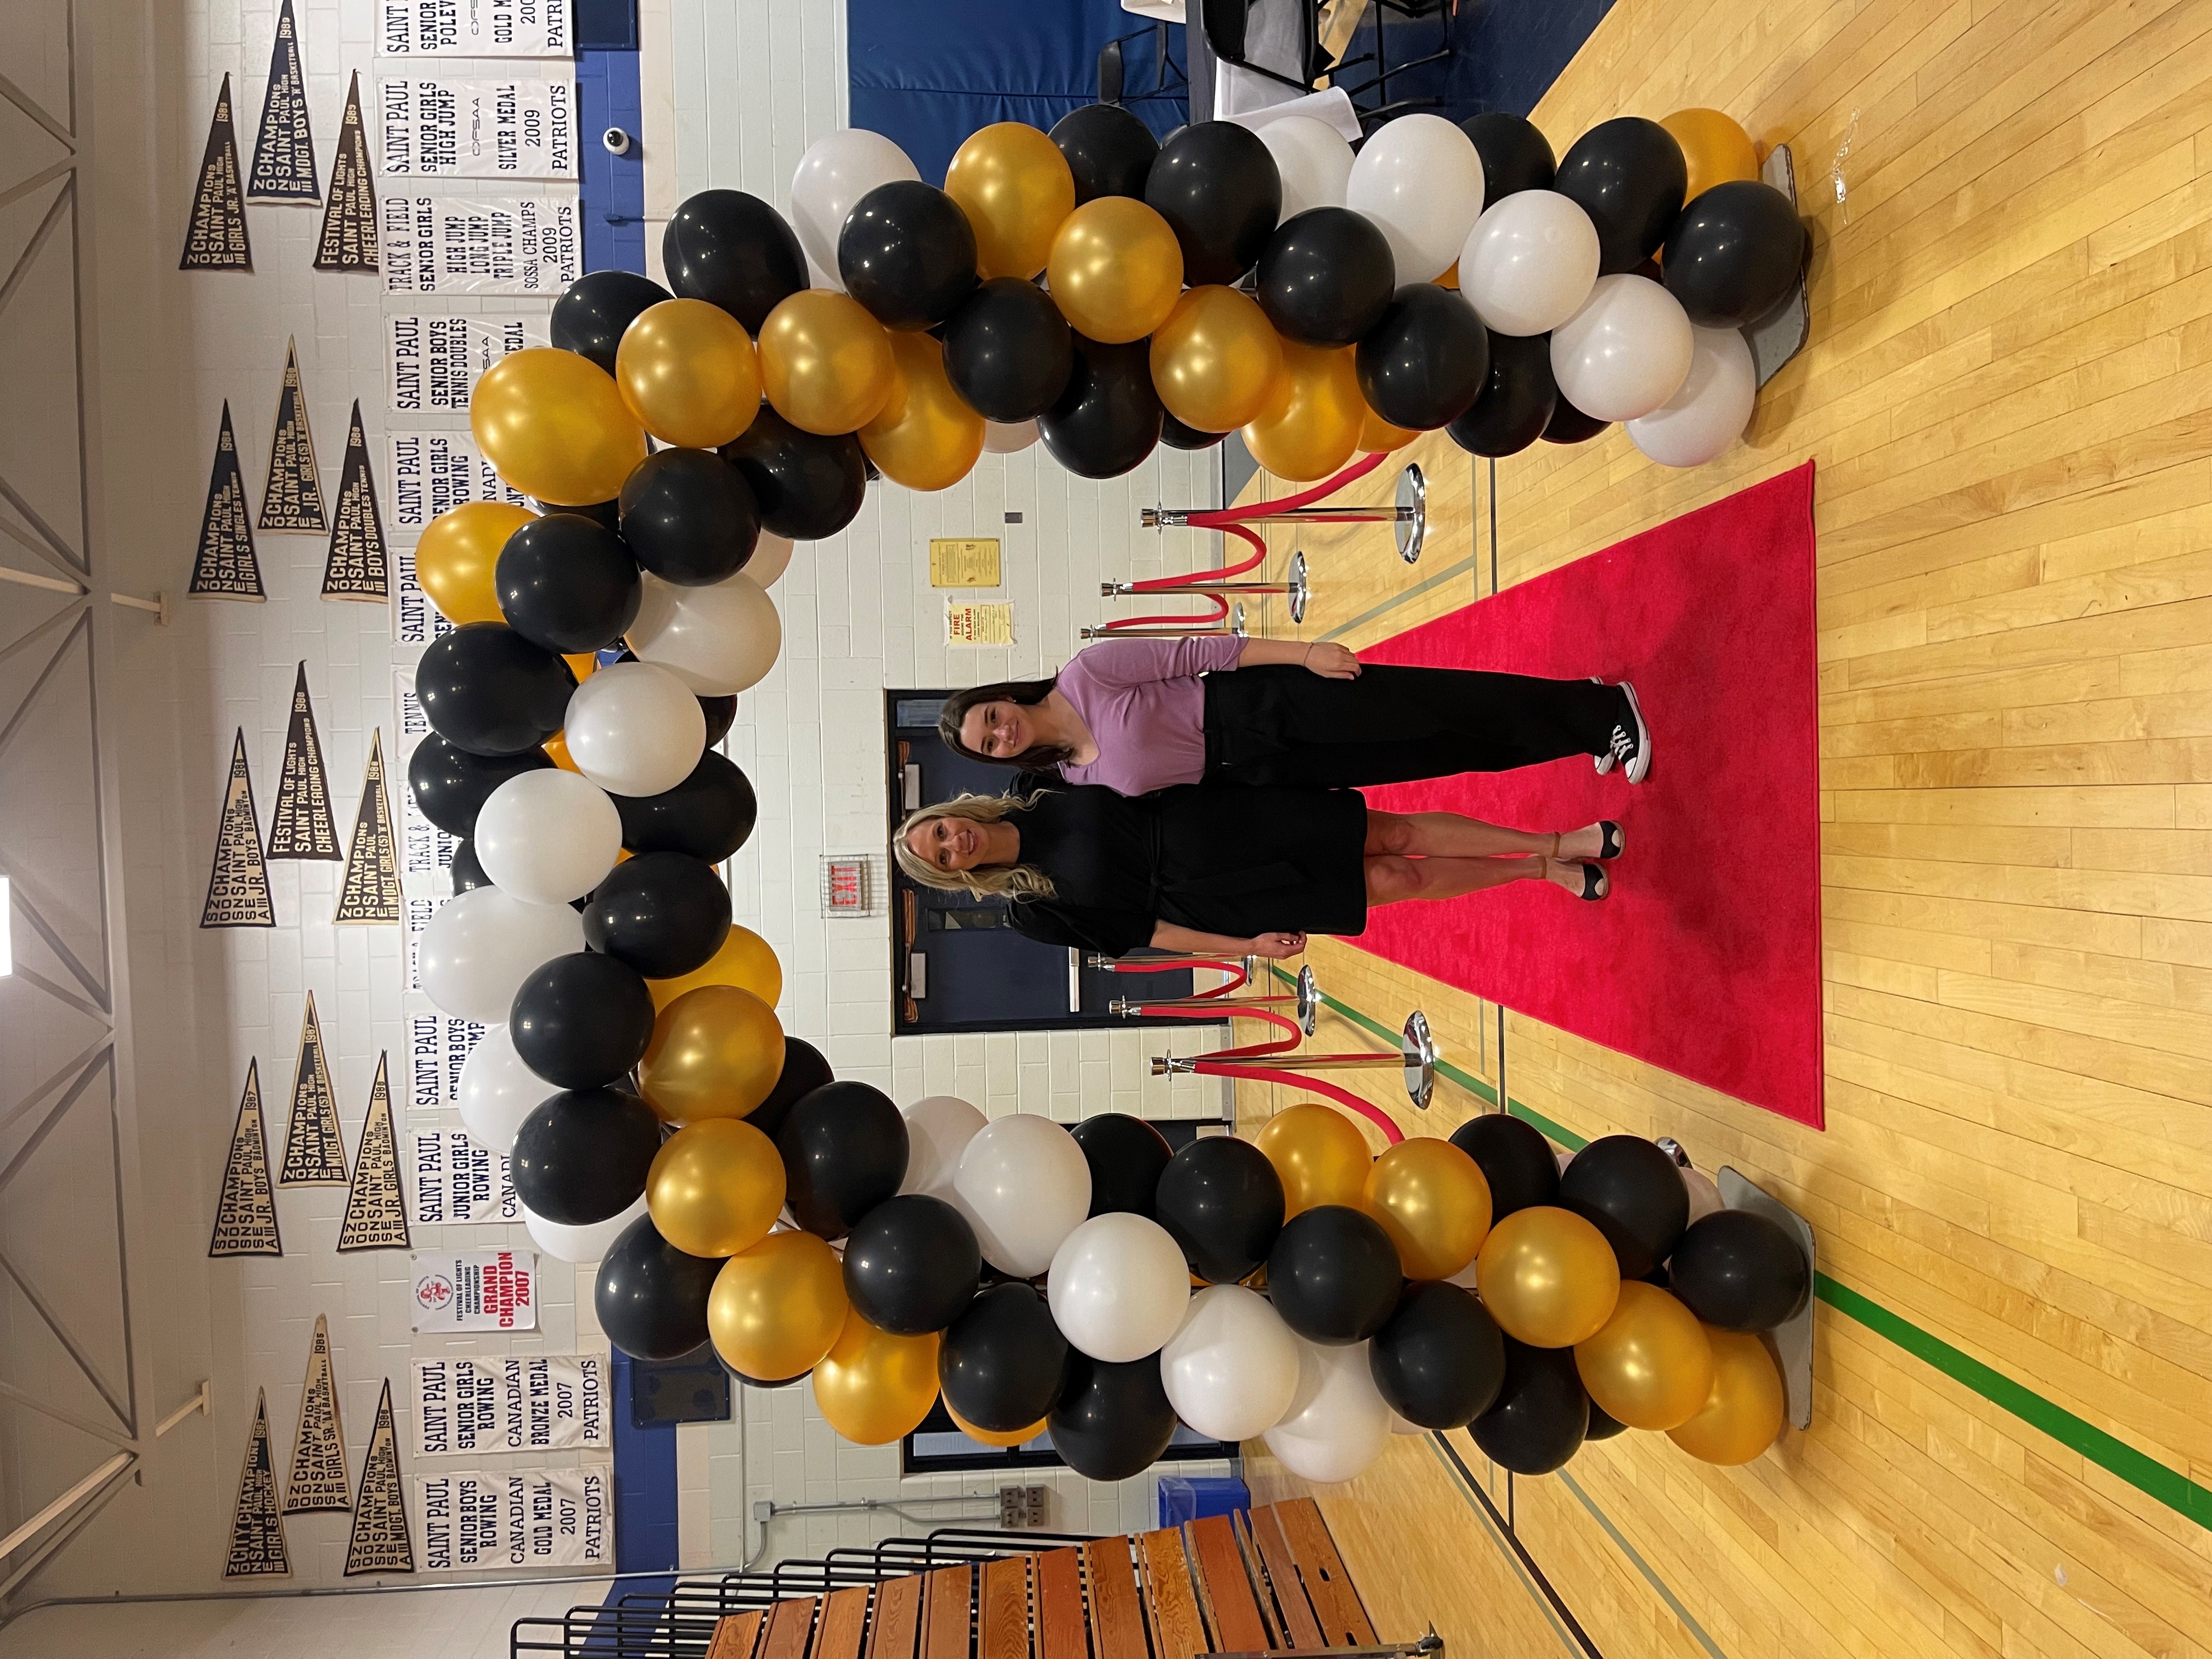 Mackenzie standing next to her teacher under a balloon arch at the Time to Shine prom.